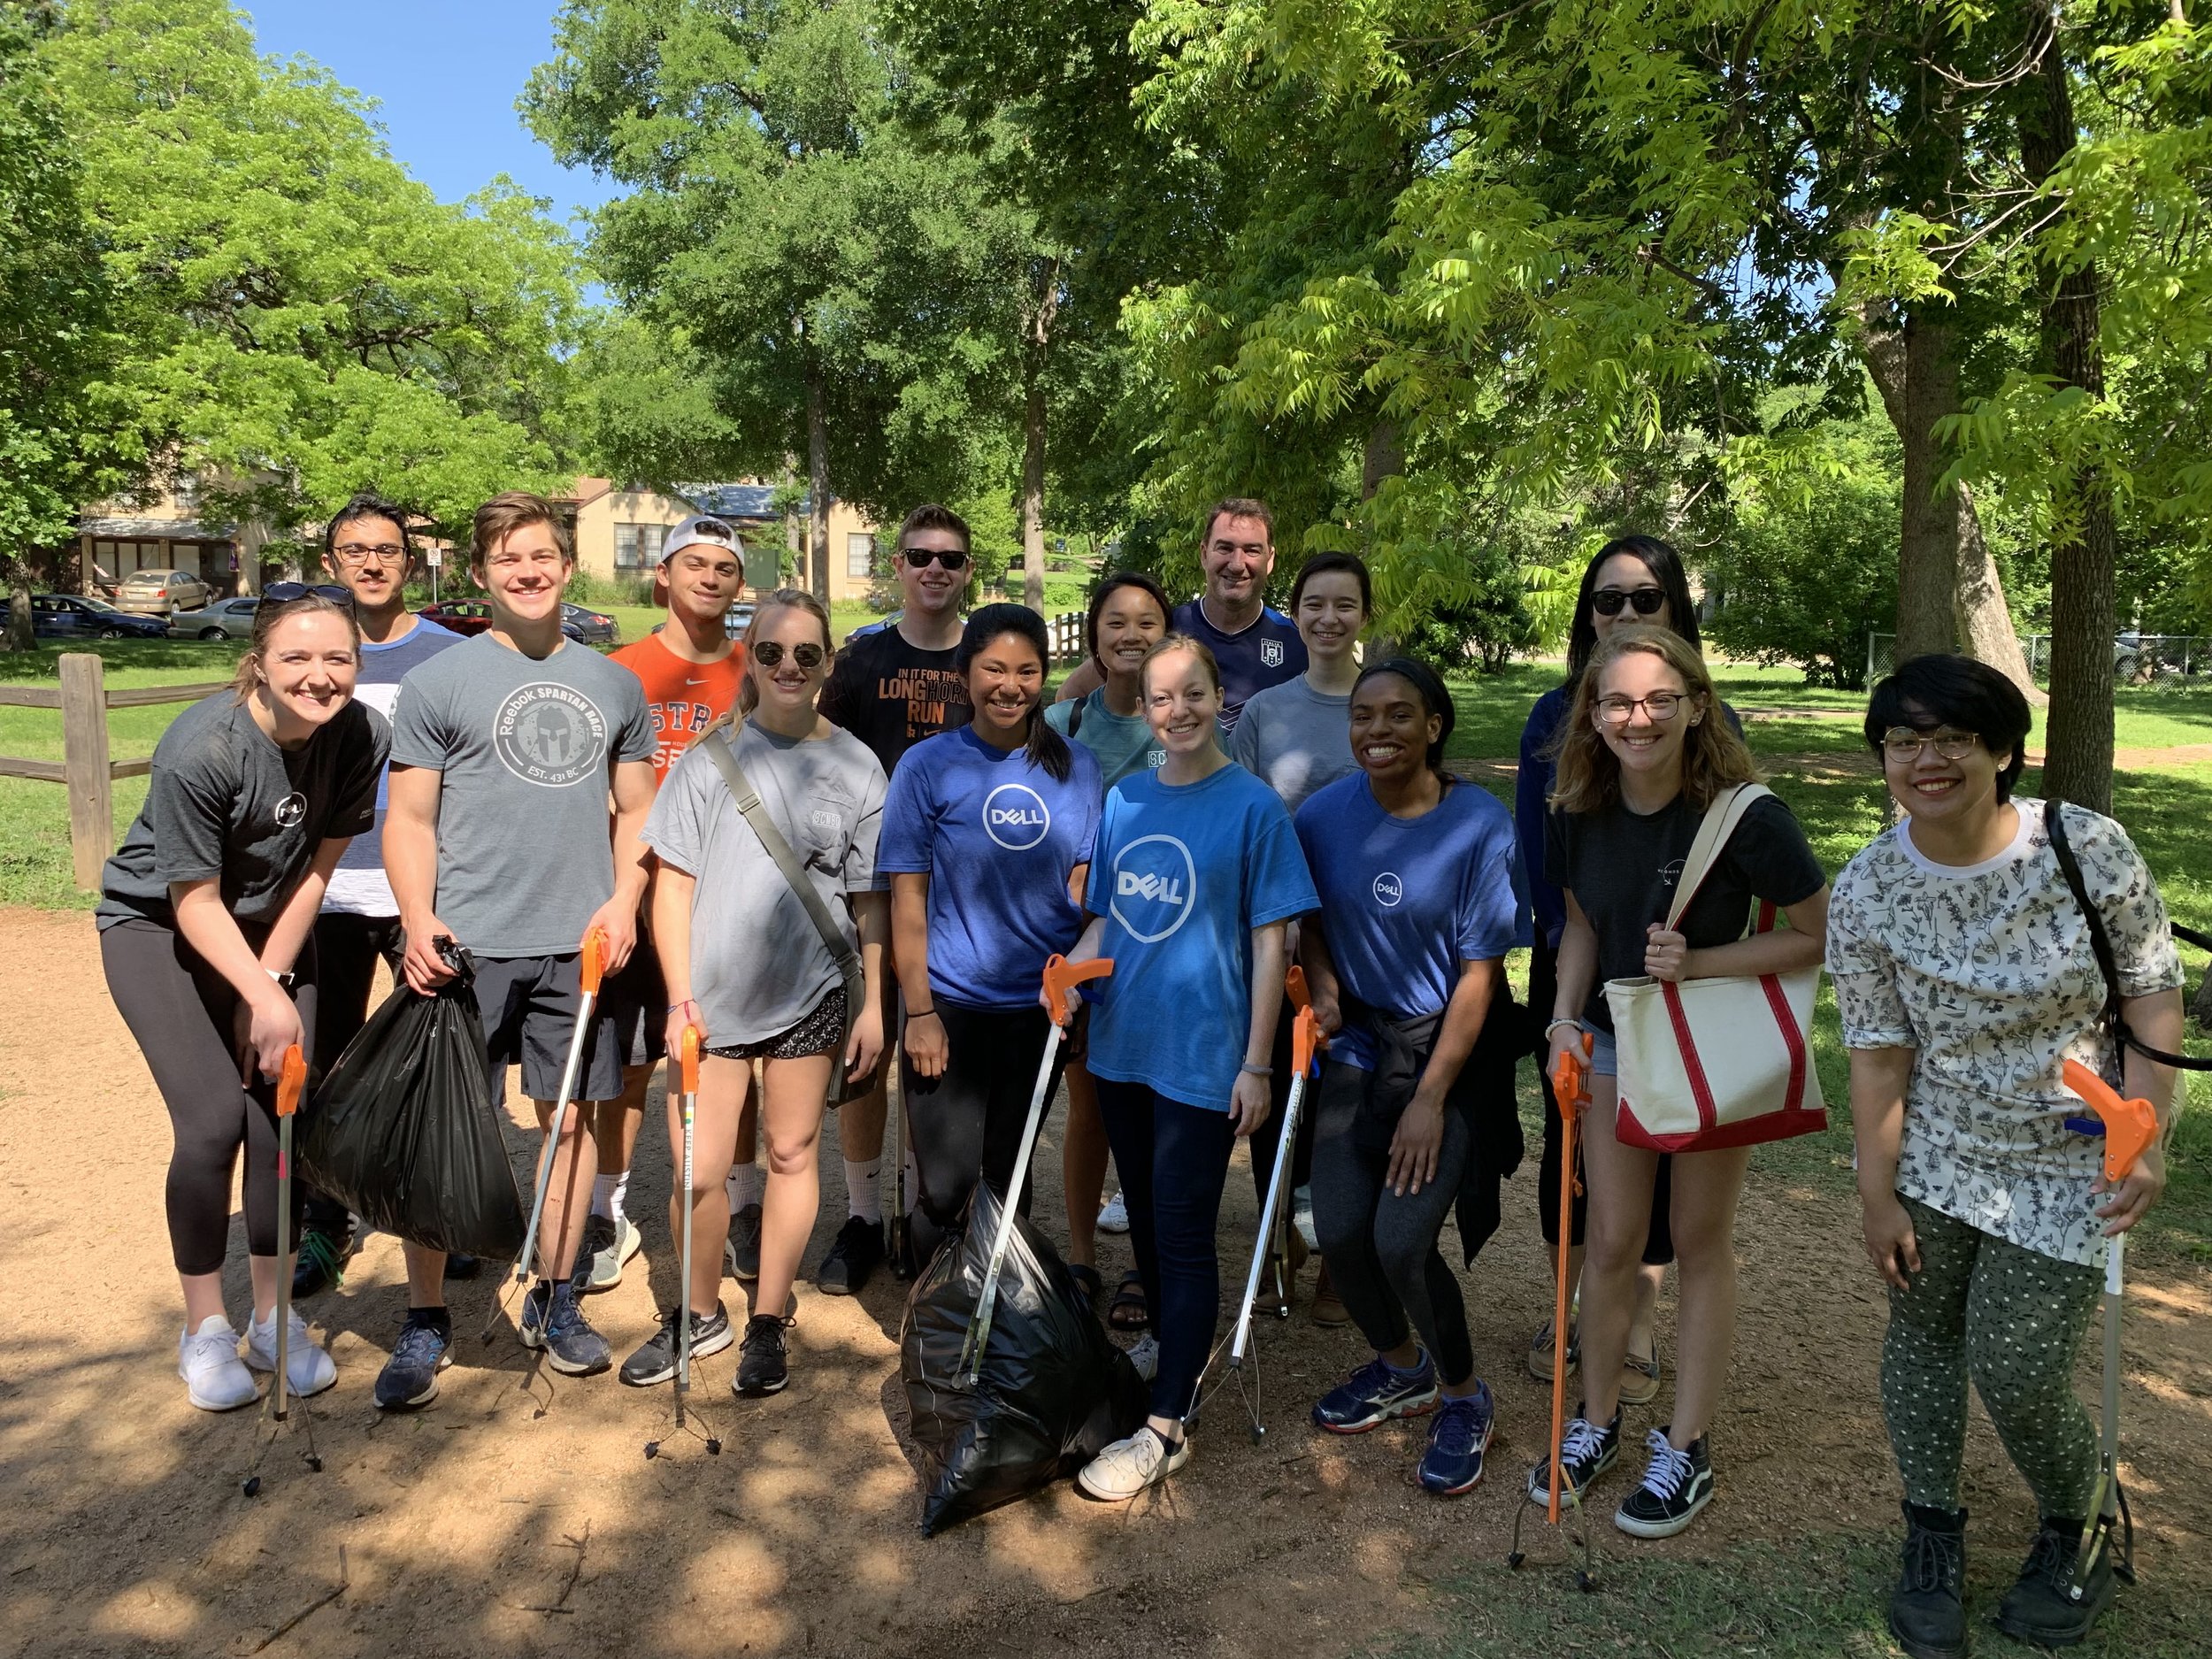 Volunteer Event with Dell. Spring 2019